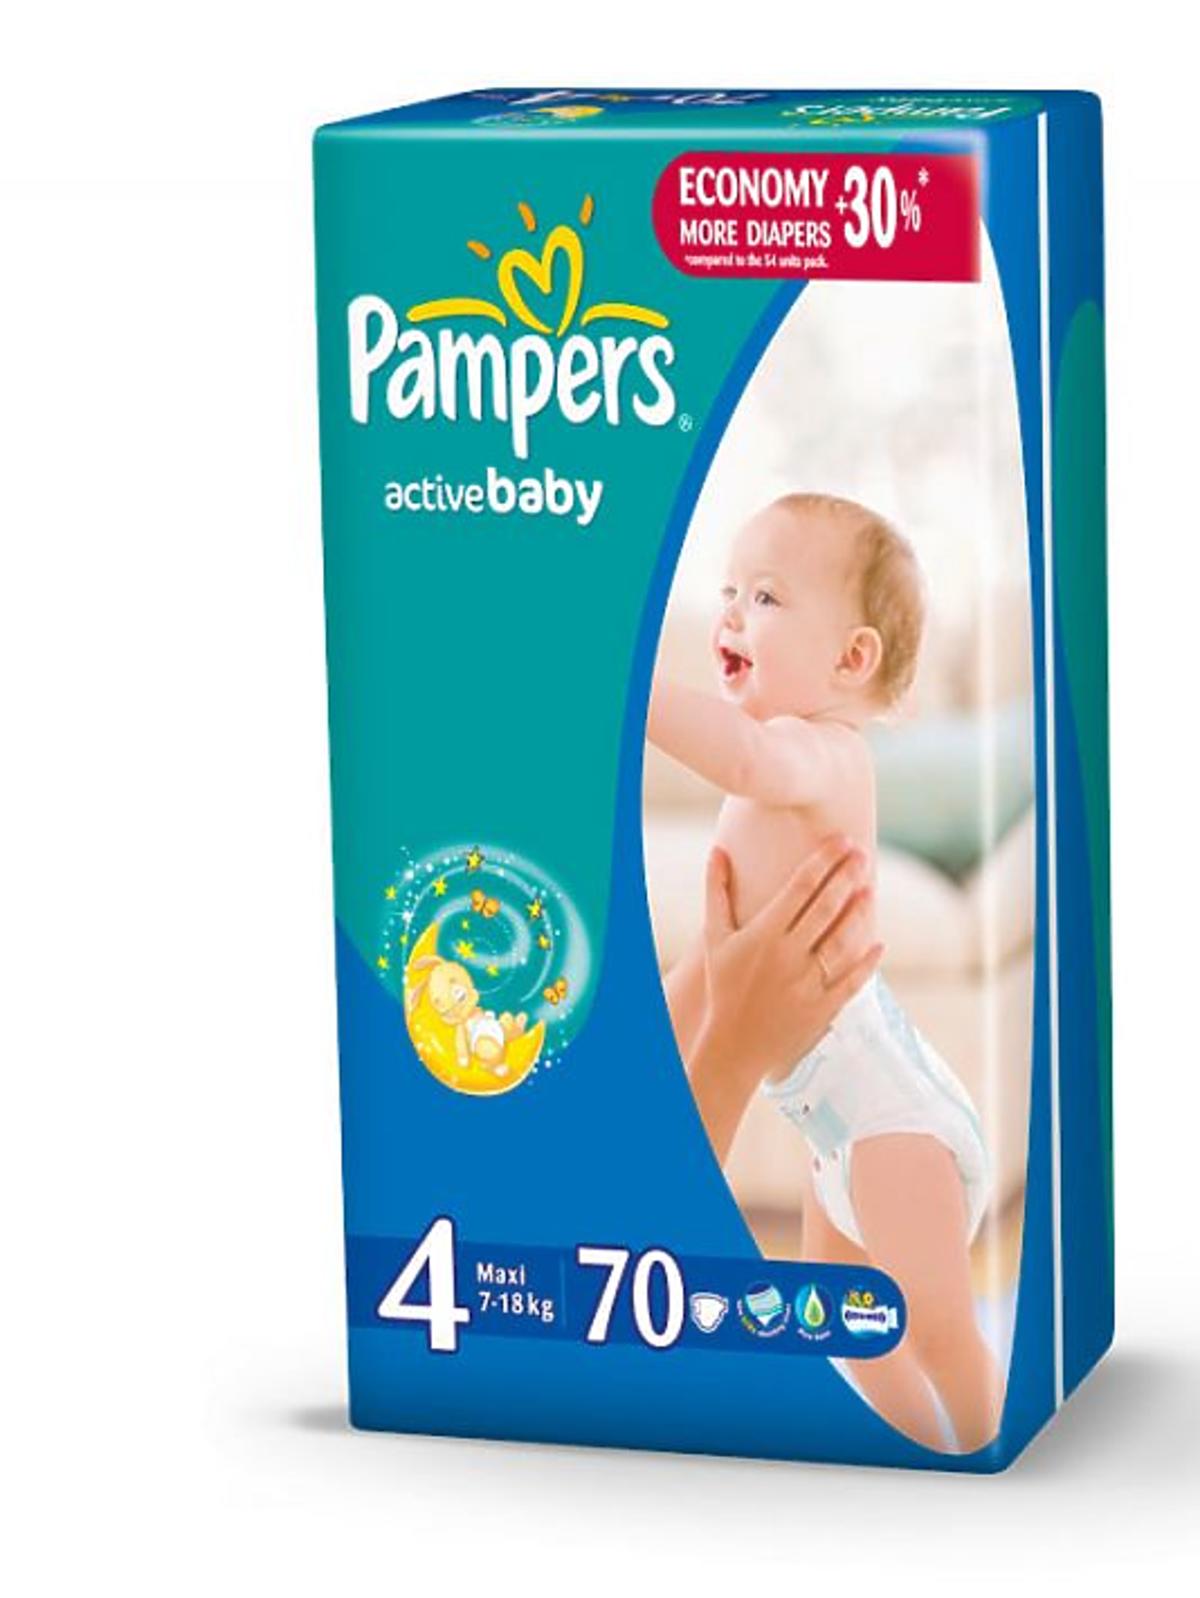 Pampers_Active_Baby.jpg